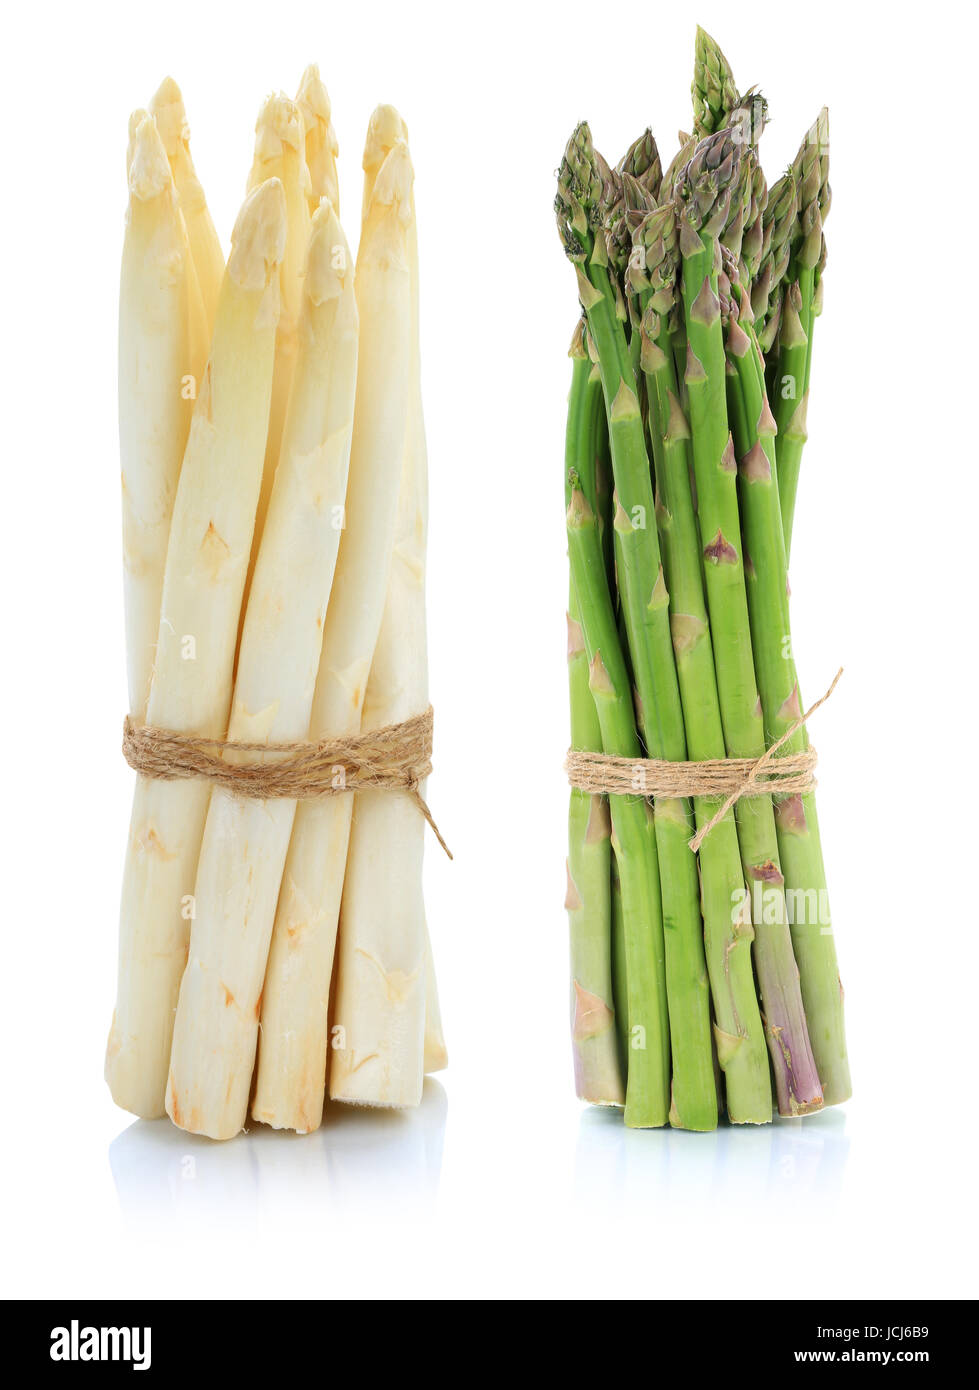 Fresh white and green asparagus bunch vegetable isolated on a white background Stock Photo